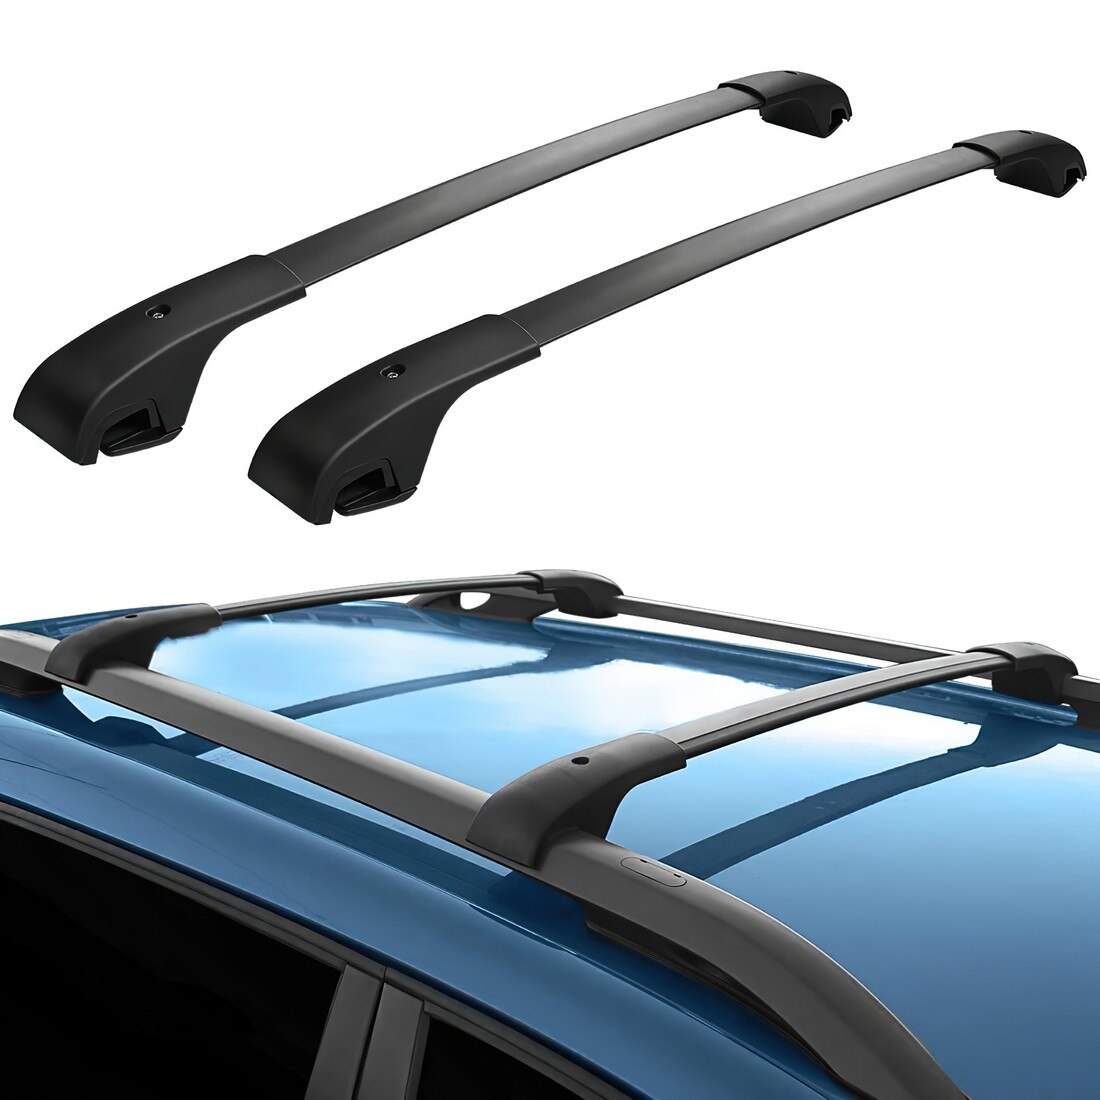 2pcs Silver Aluminum OE Style Roof Rack Cross Bars Cargo Carrier Fit 14-18 Rogue